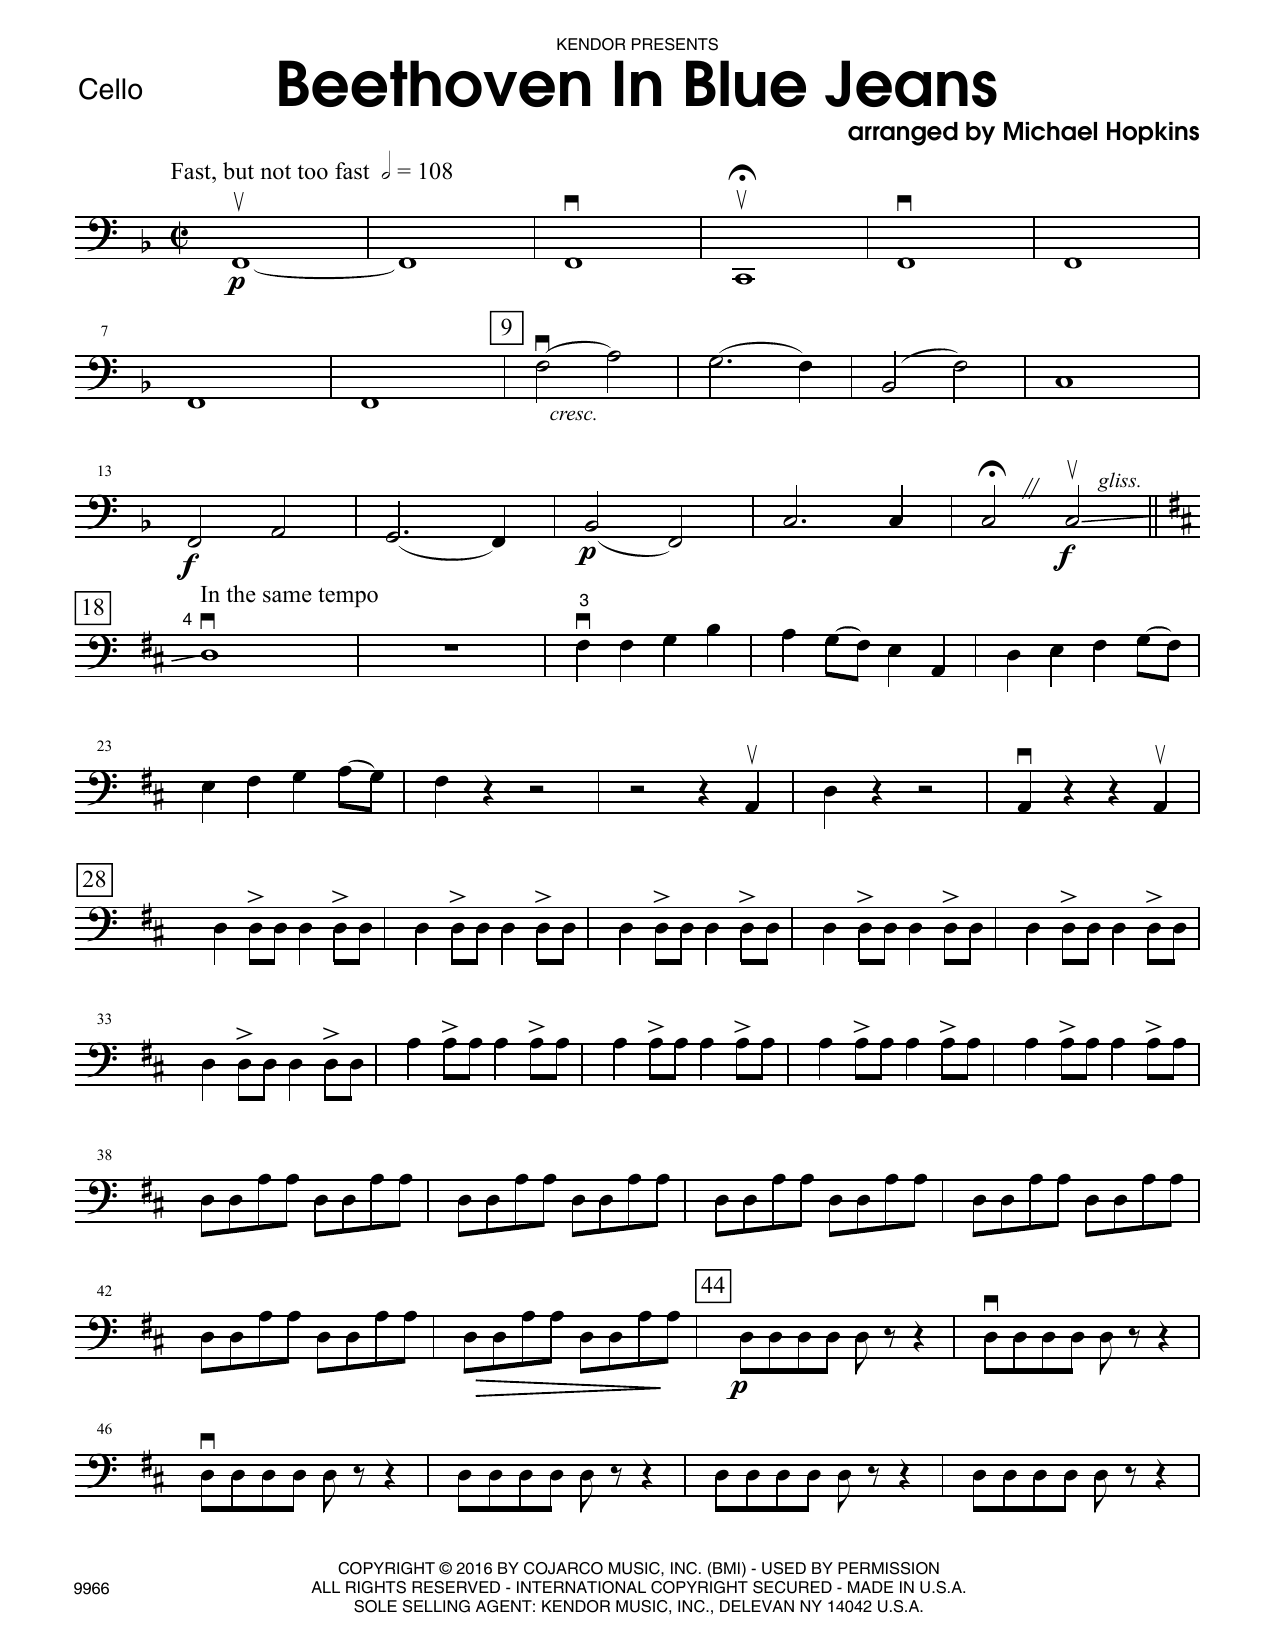 Download Michael Hopkins Beethoven In Blue Jeans - Cello Sheet Music